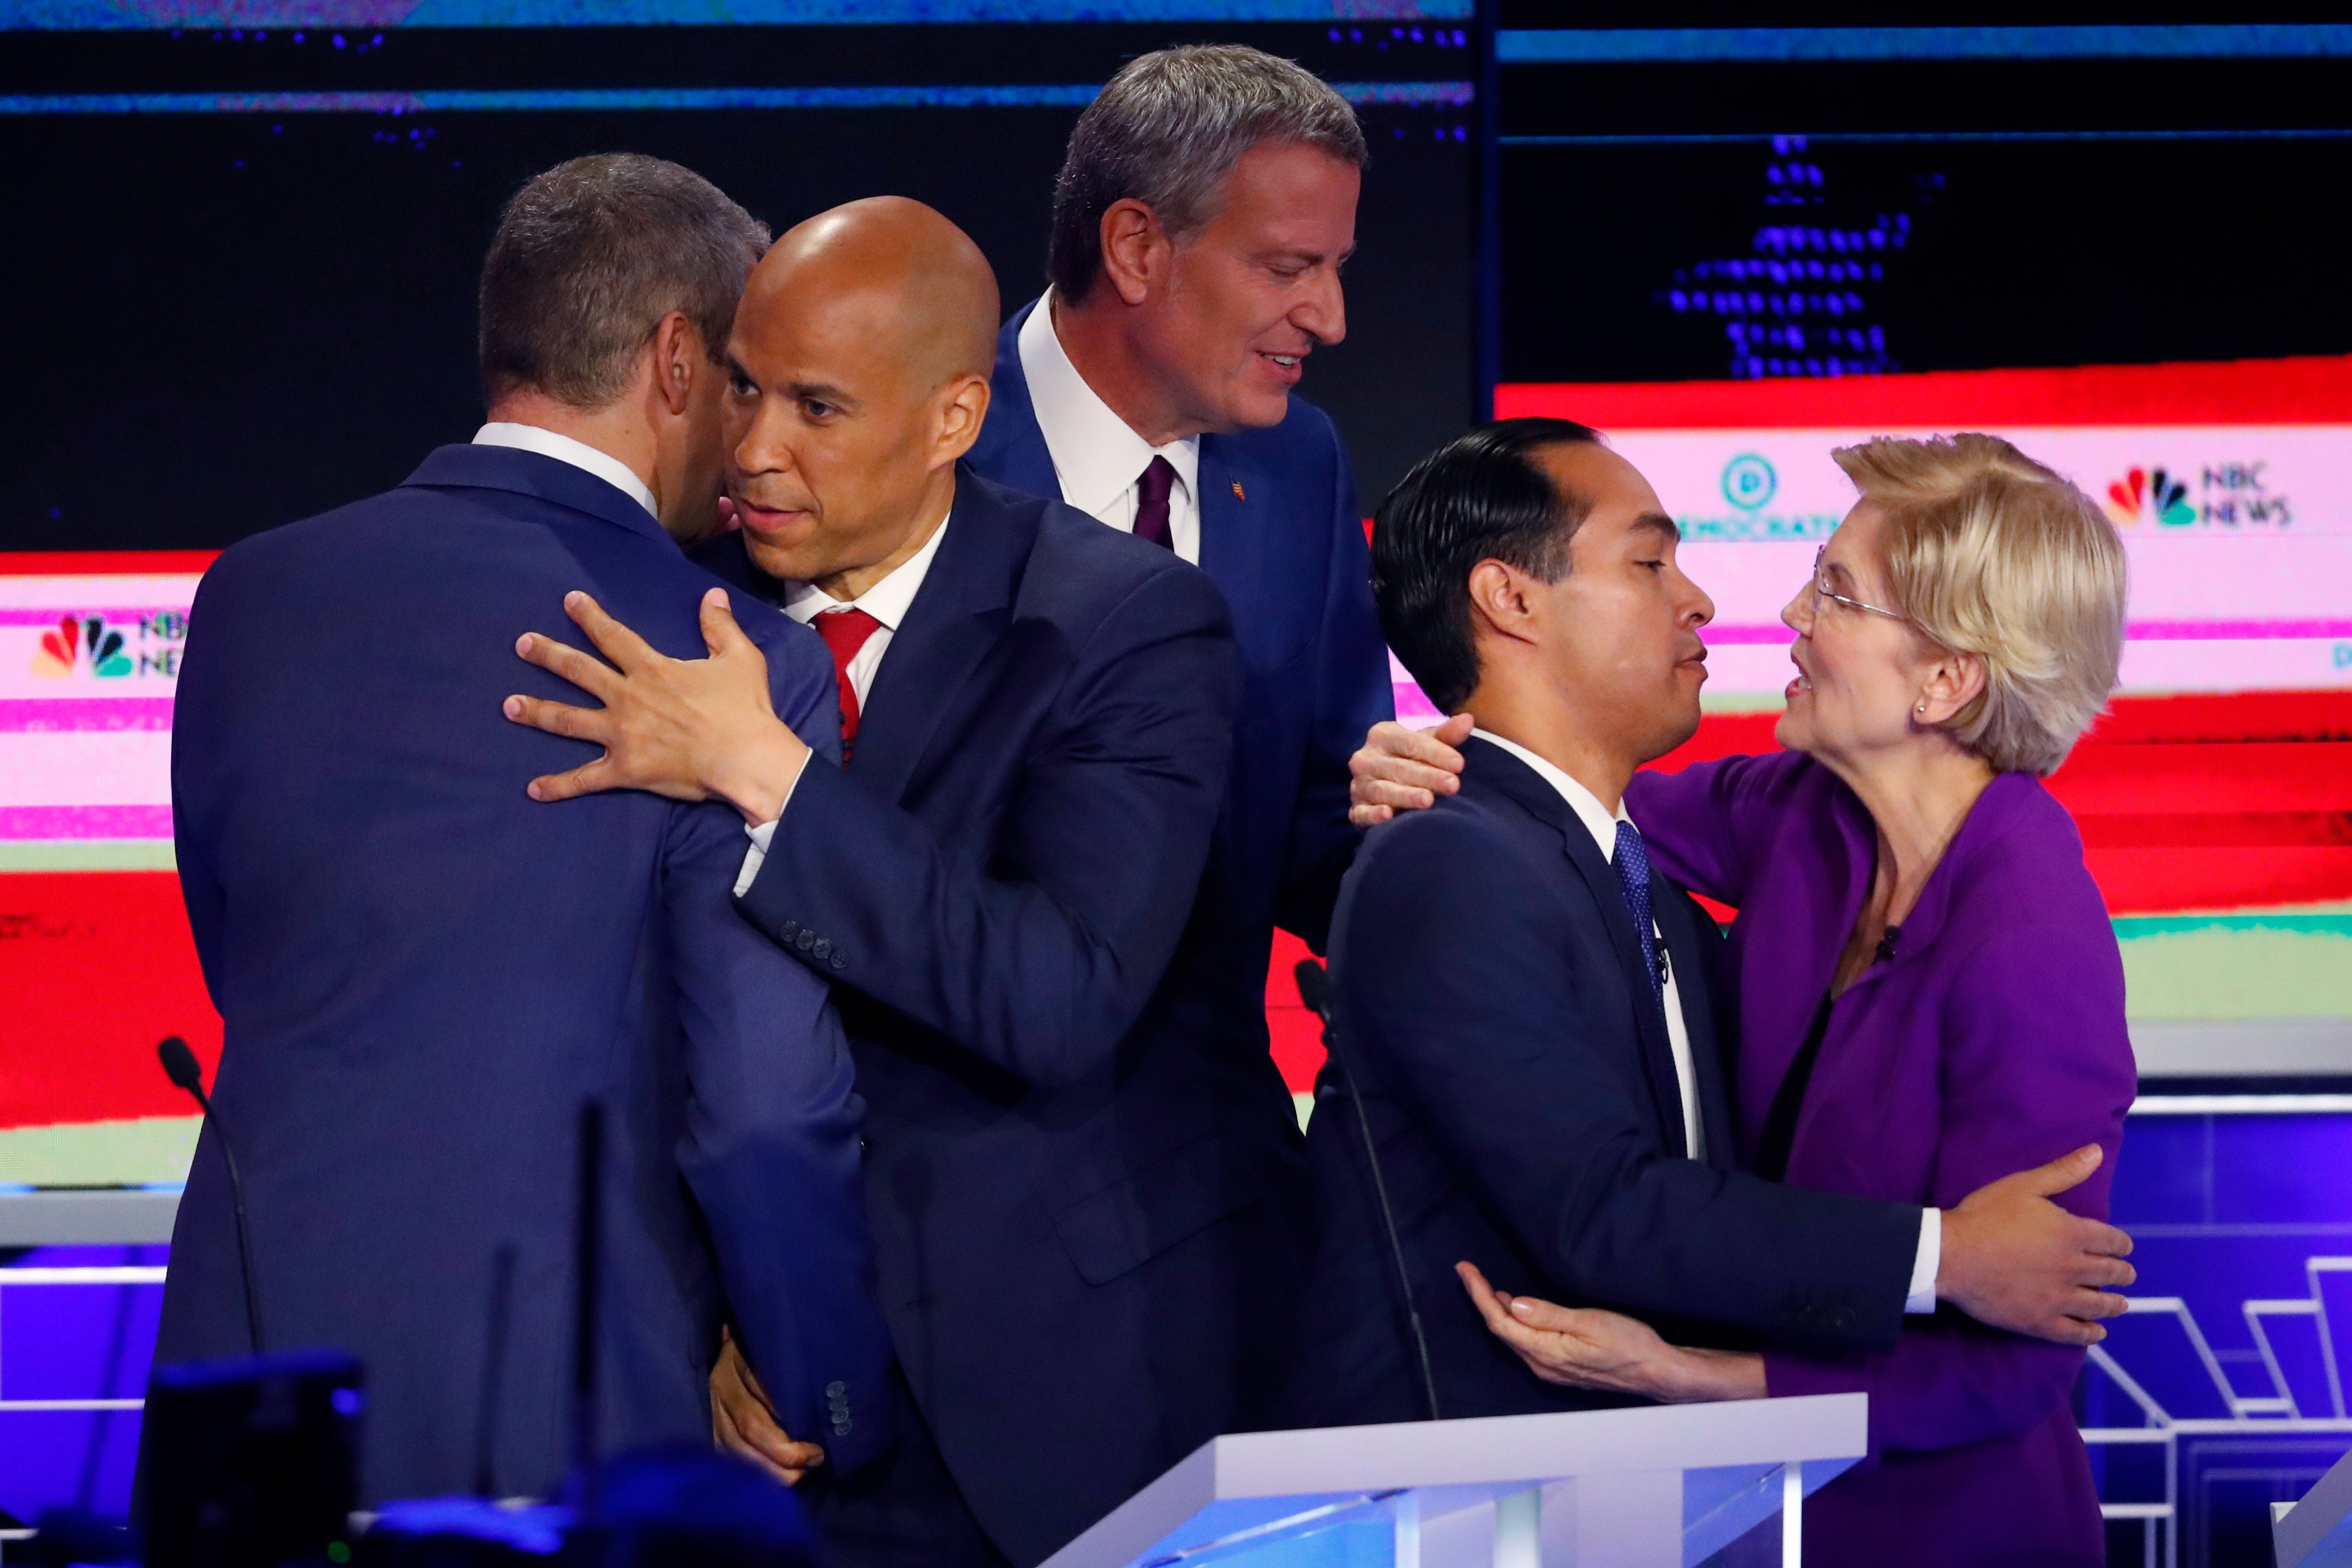 Debate moment: Most Democrats might not give up private healthcare